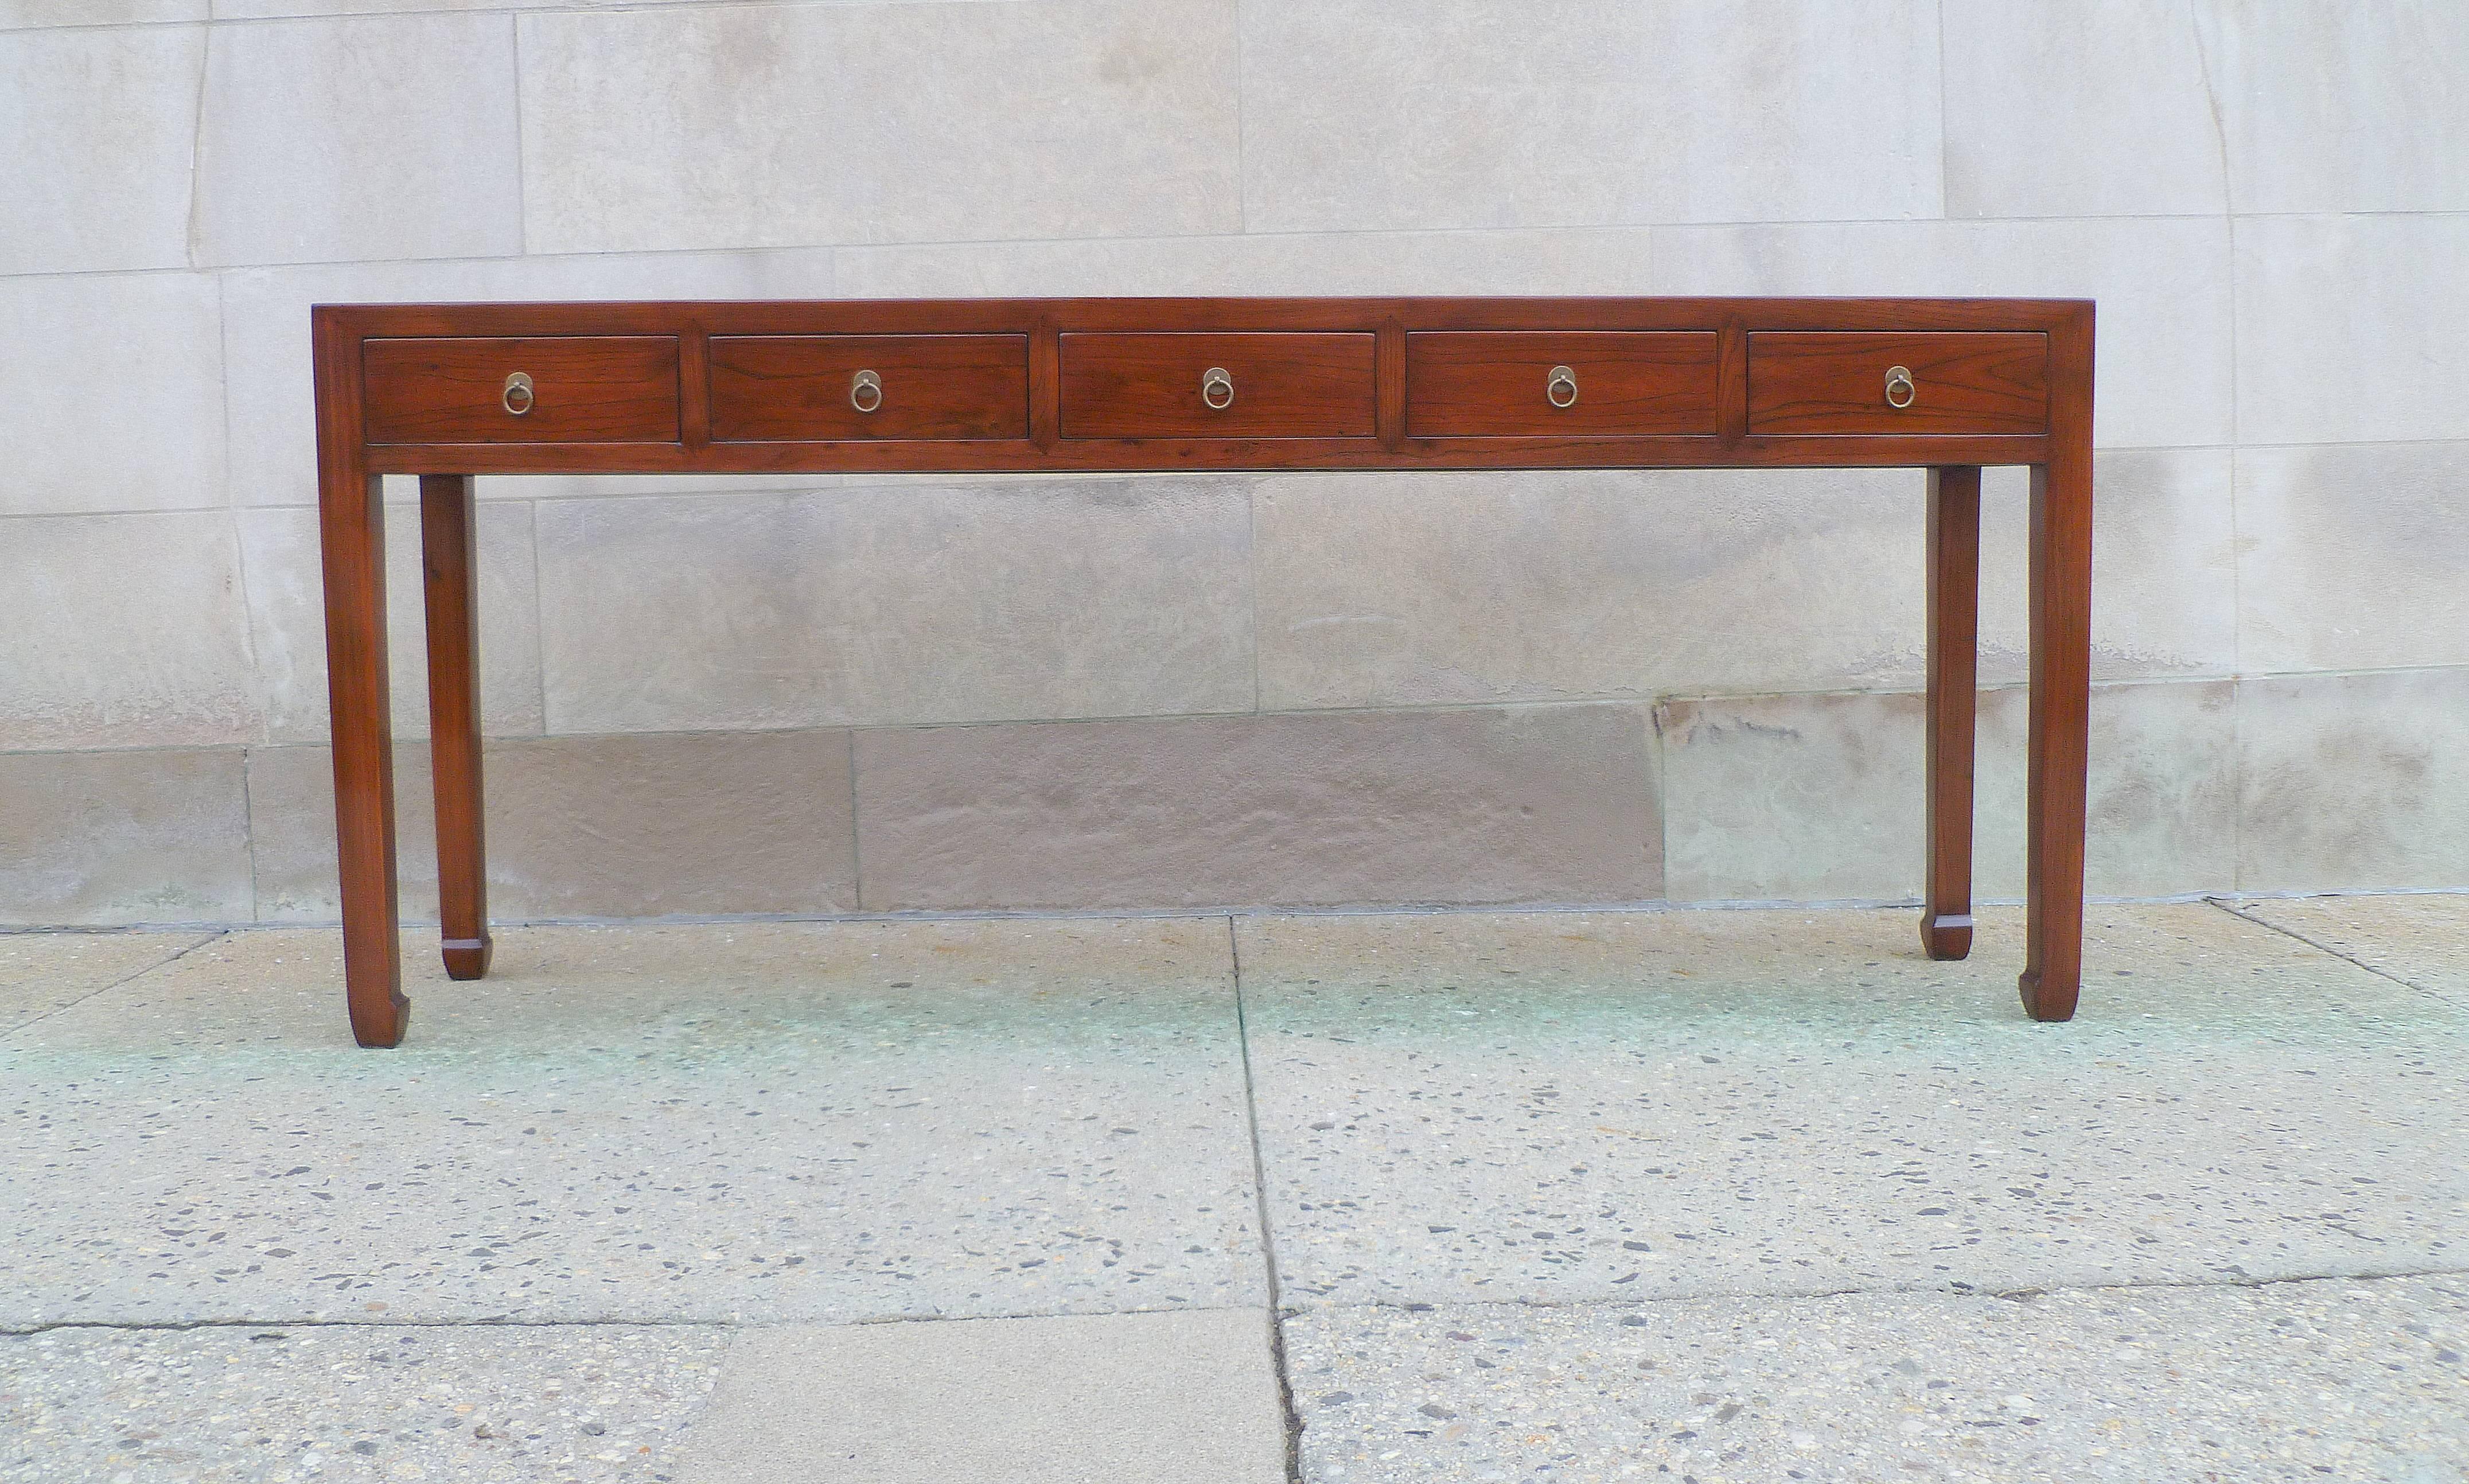 Fine Jumu console table with five drawers. Very elegant and fine quality. Beautiful color and simple form.